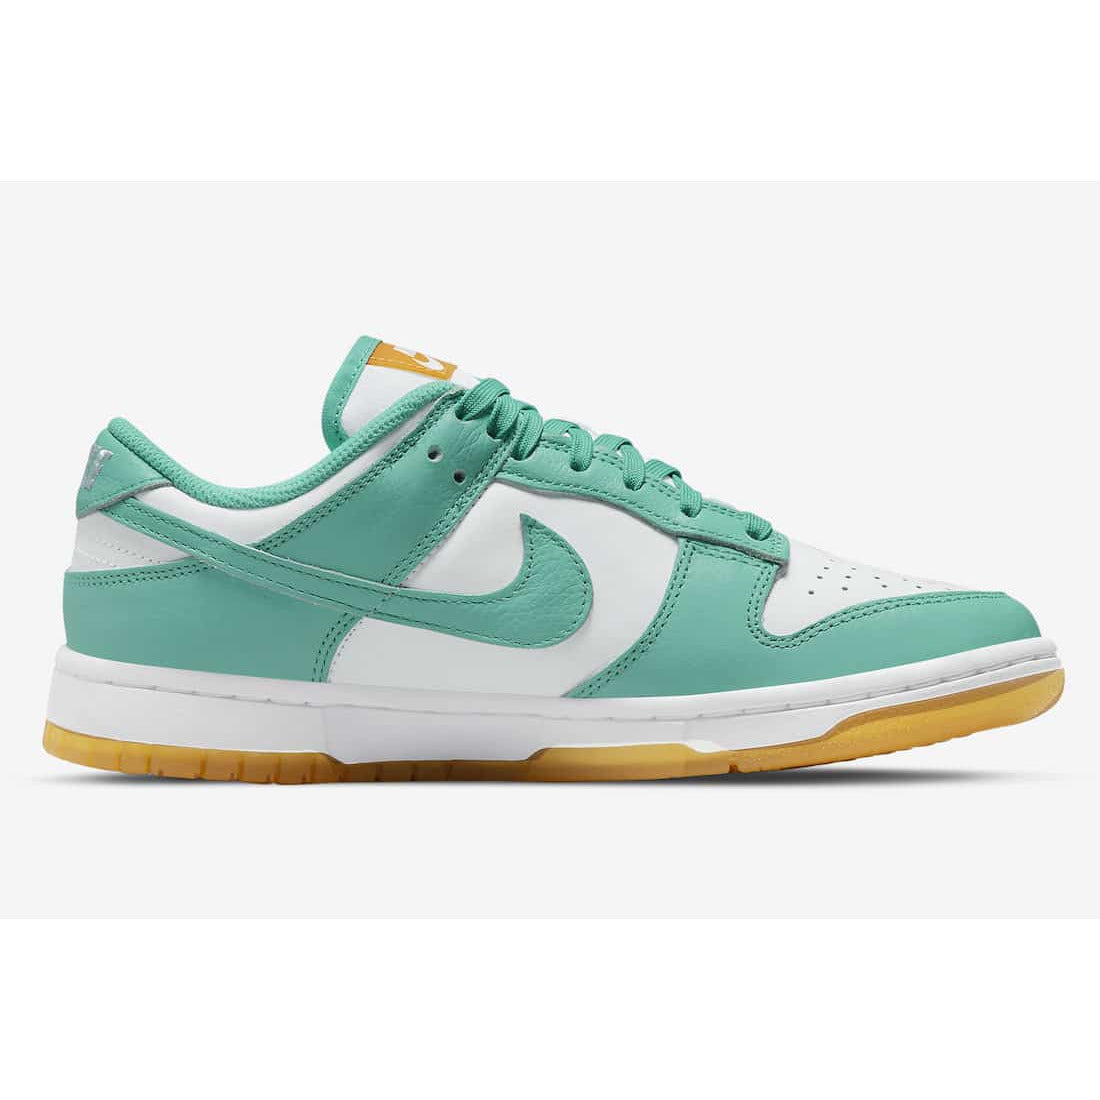 Dunk Low " Teal Zeal "